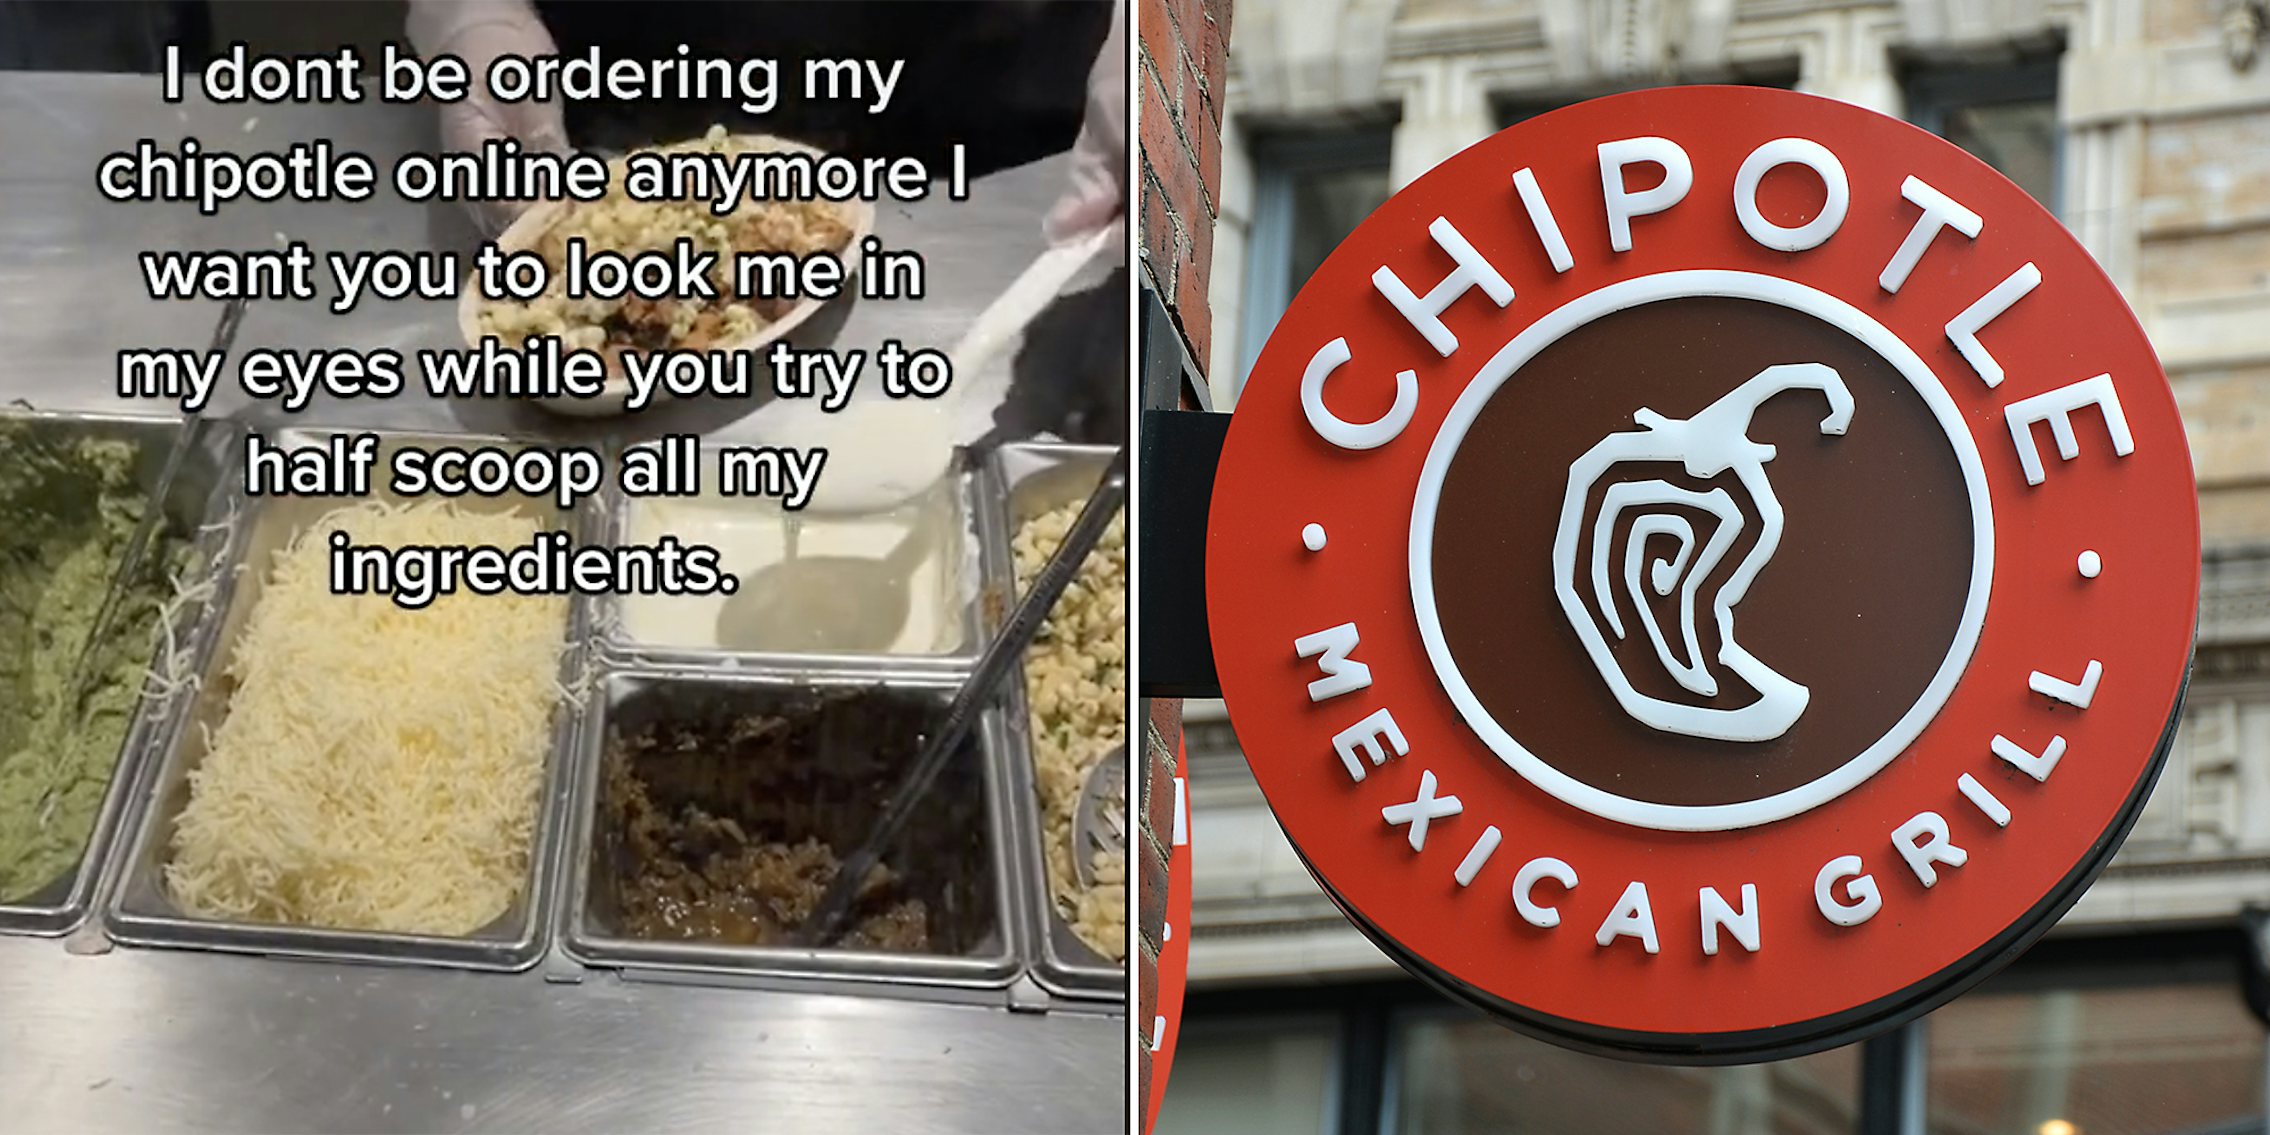 A Chipotle worker (L) and a Chipotle sign (R).